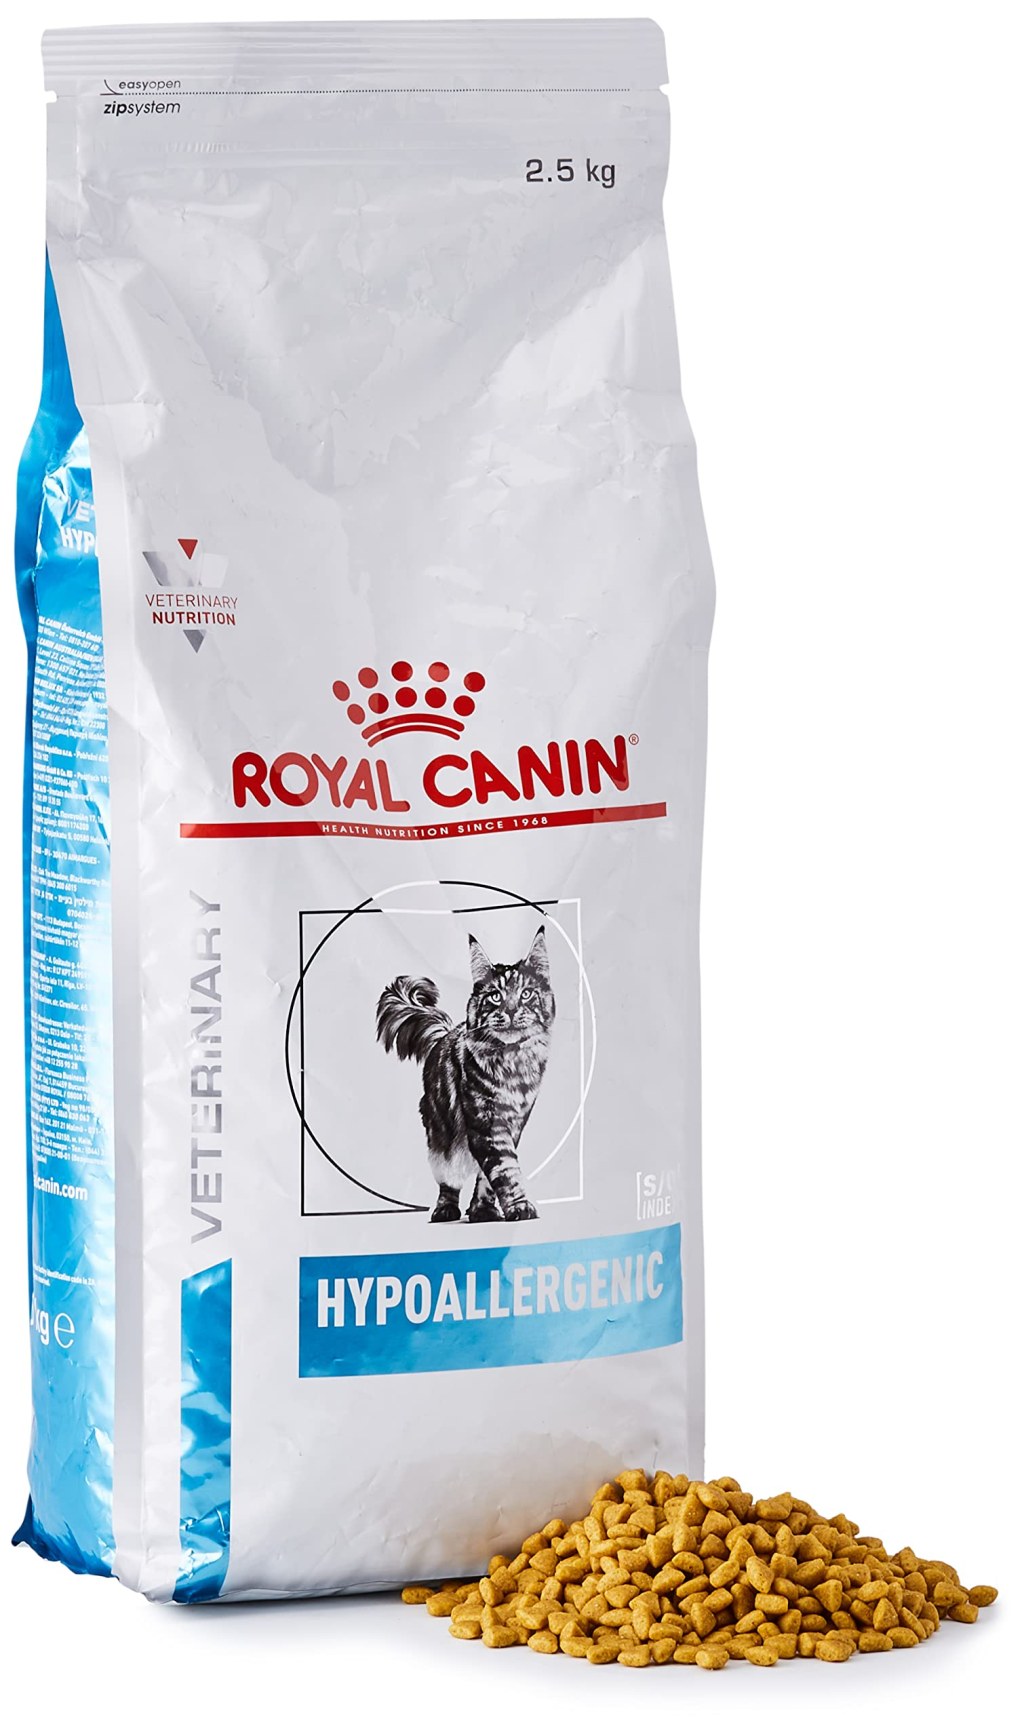 Picture of: Royal Canin Hypoallergenic Cat Food